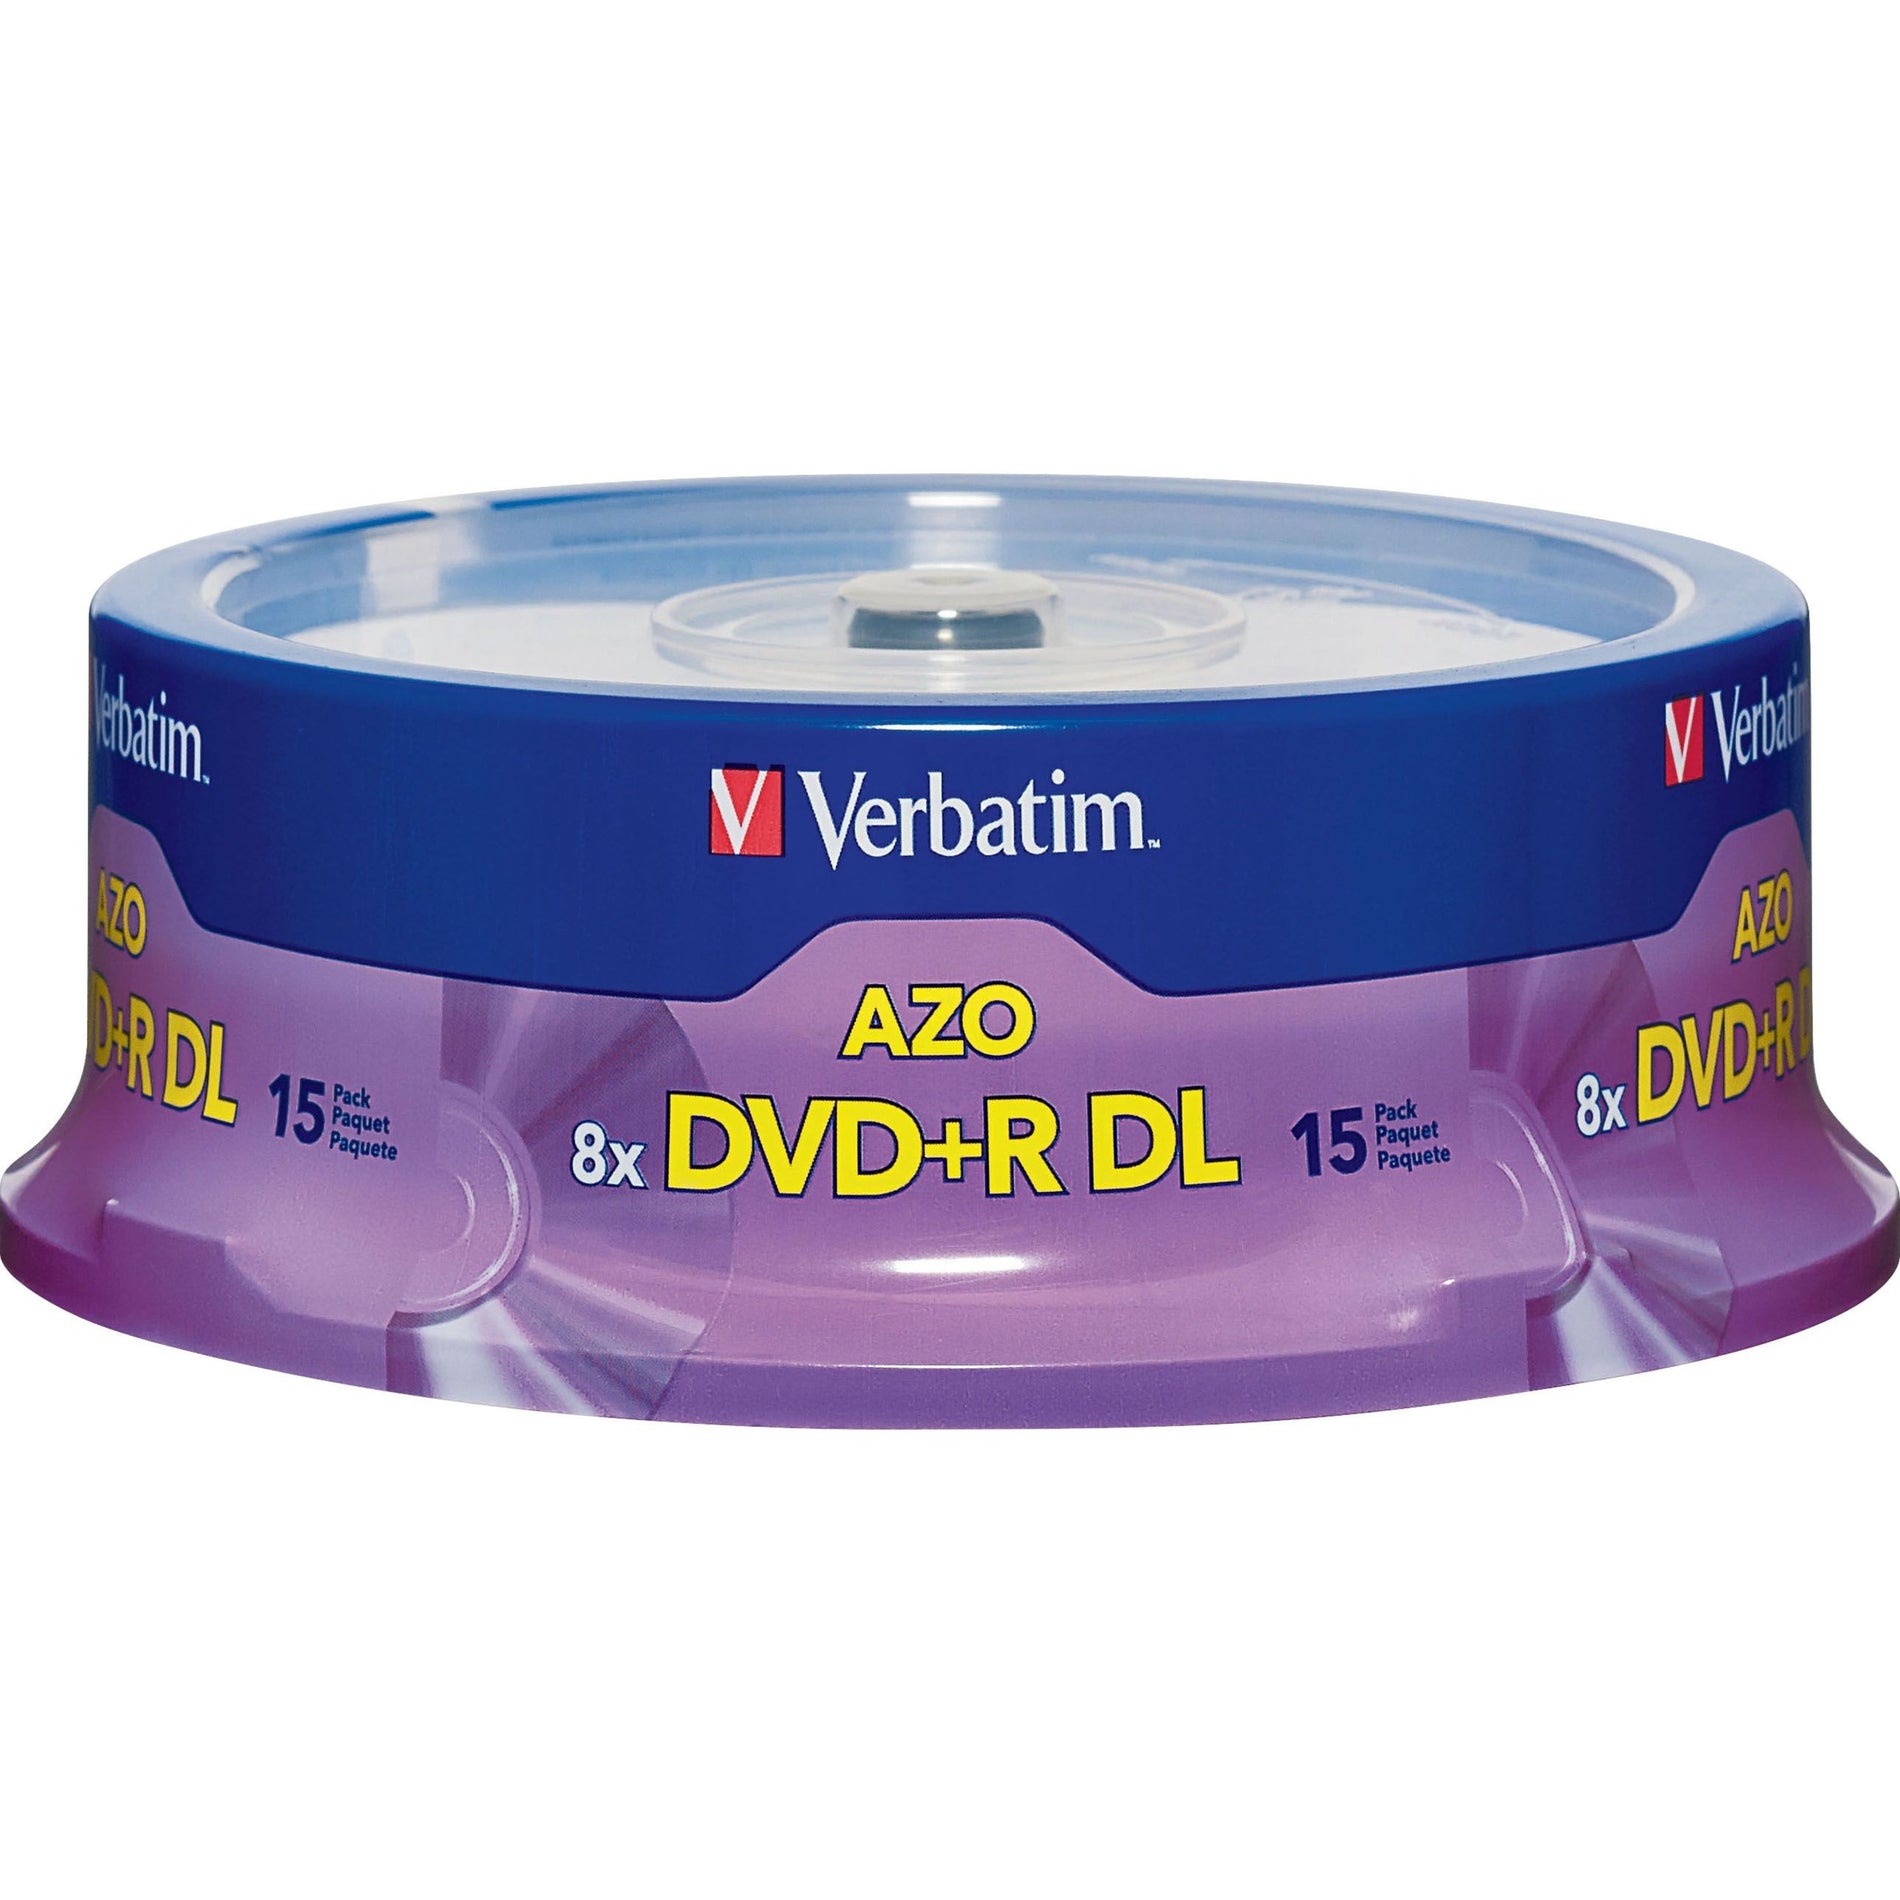 Verbatim 95484 Double Layer DVD+R DL 8.5GB 8x 15pk Spindle, Branded Surface